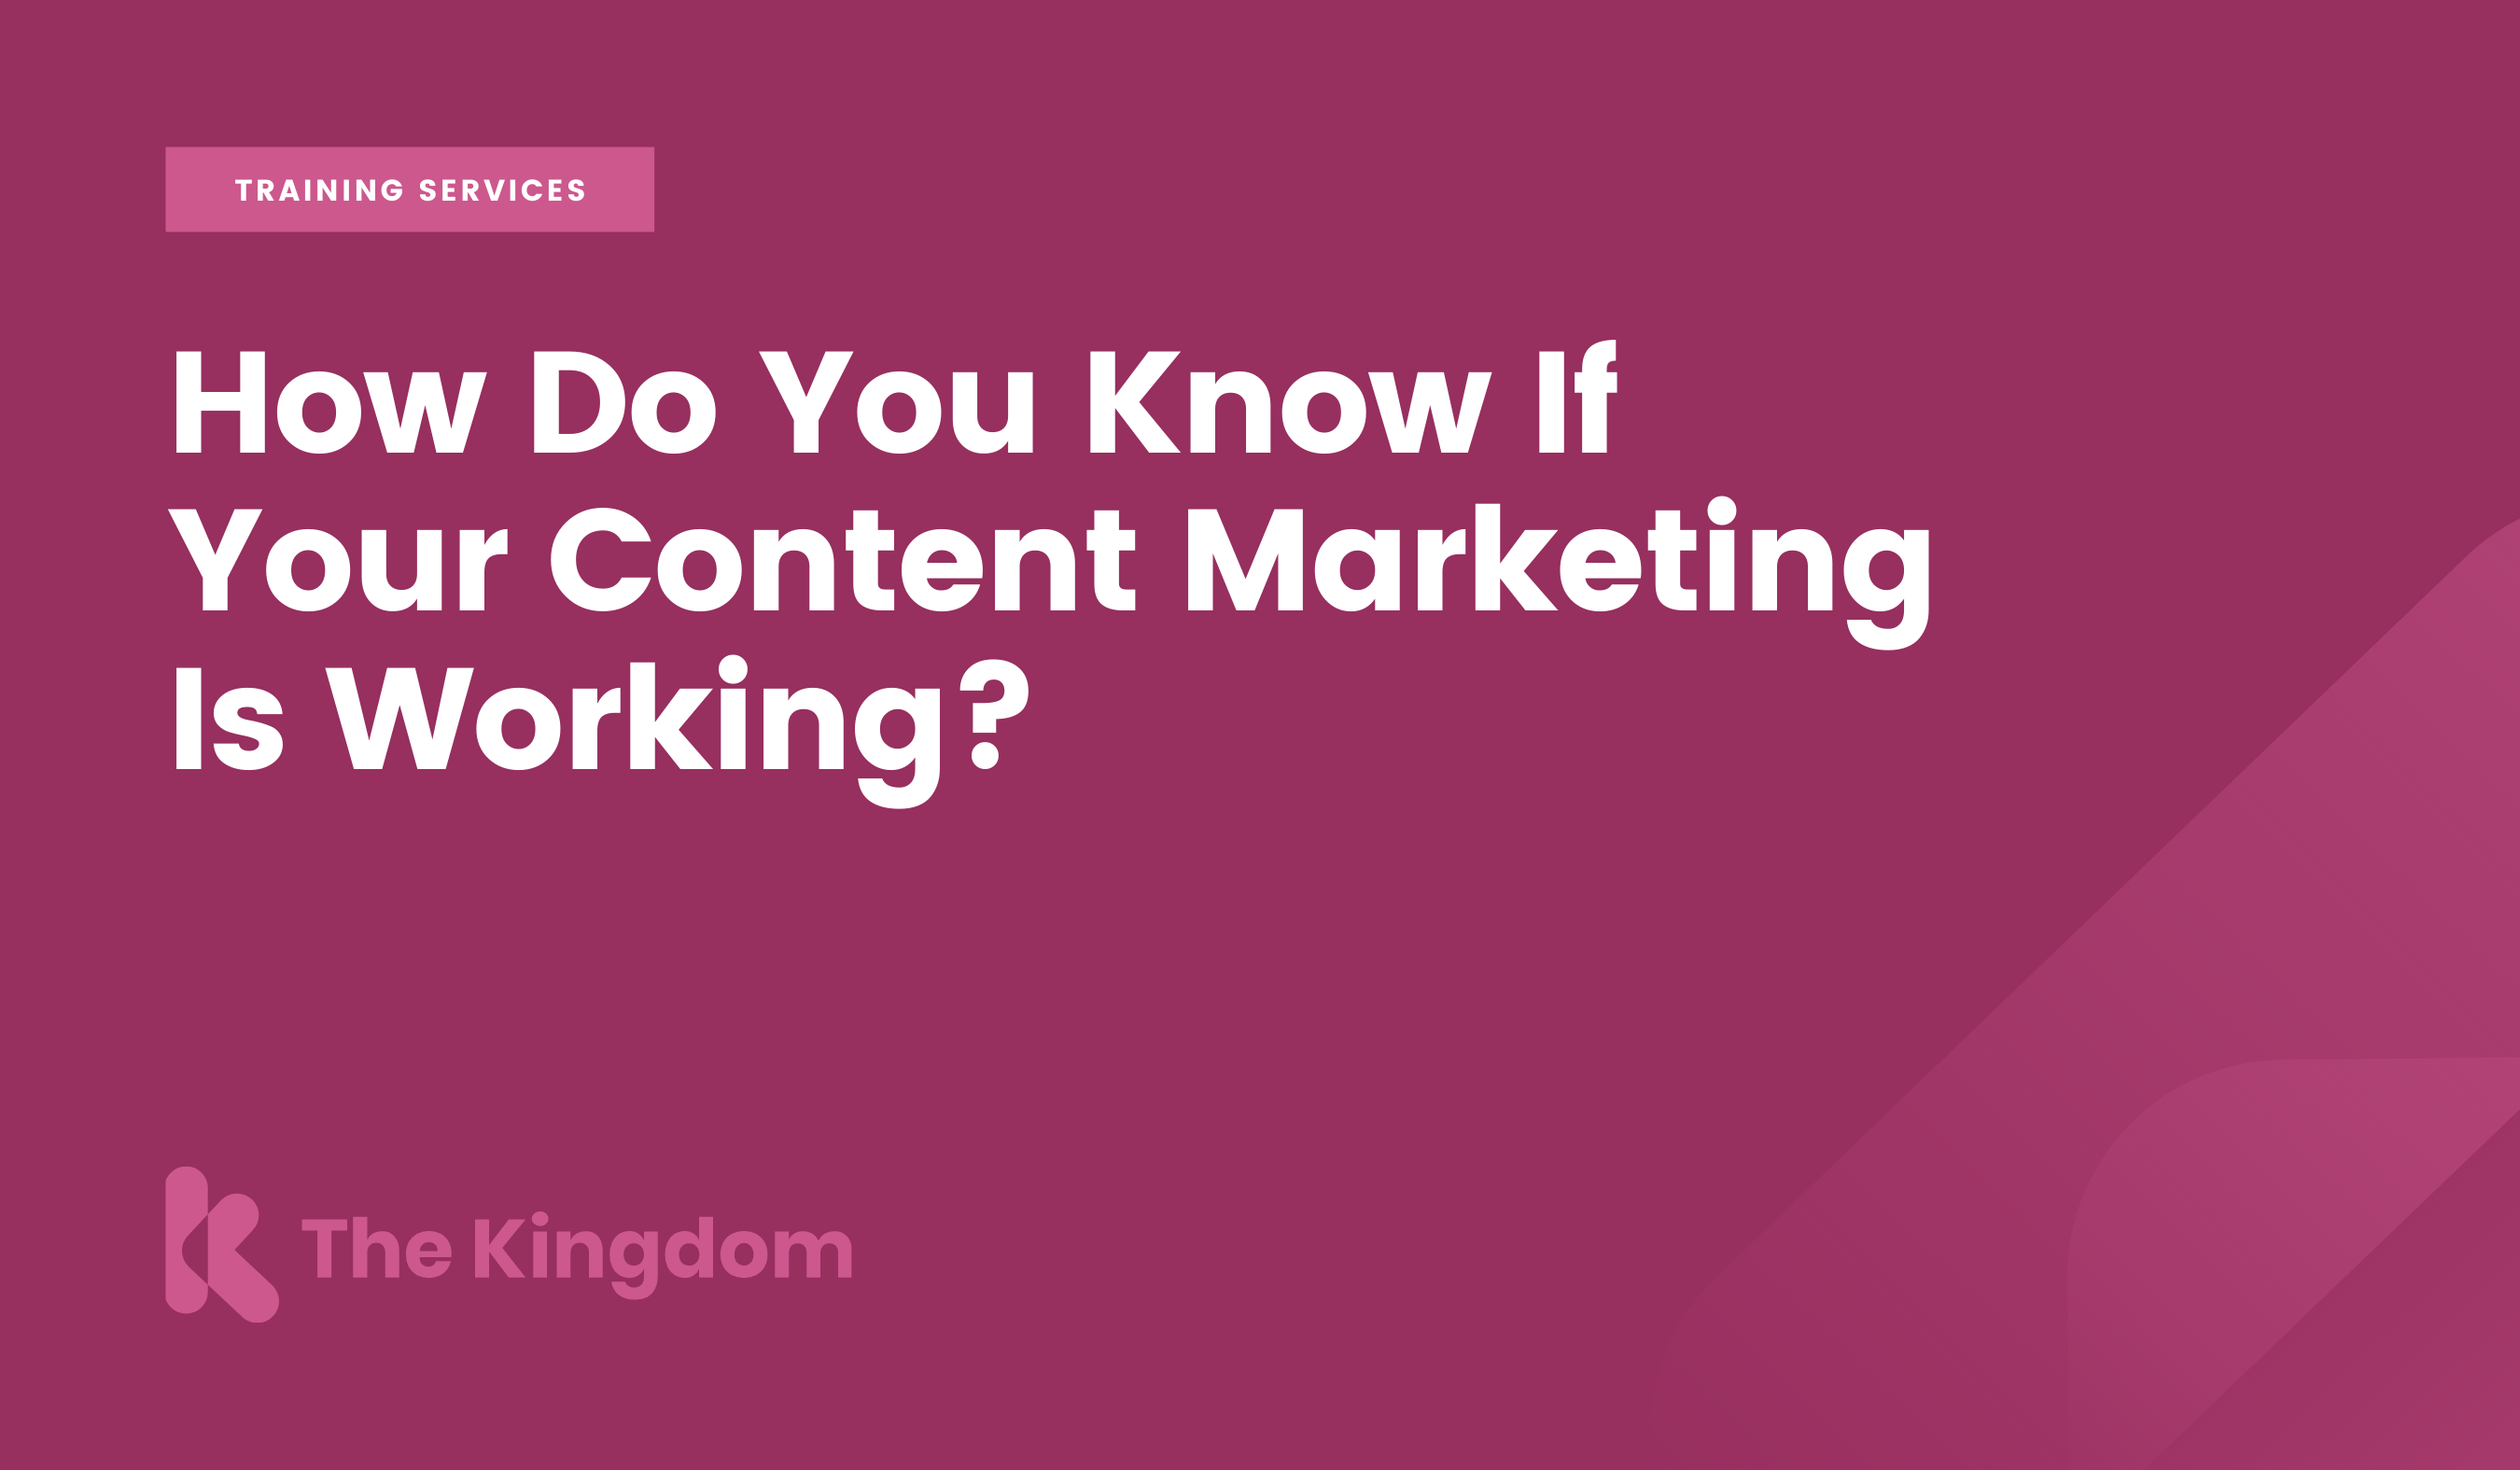 How Do You Know If Your Content Marketing is Working?